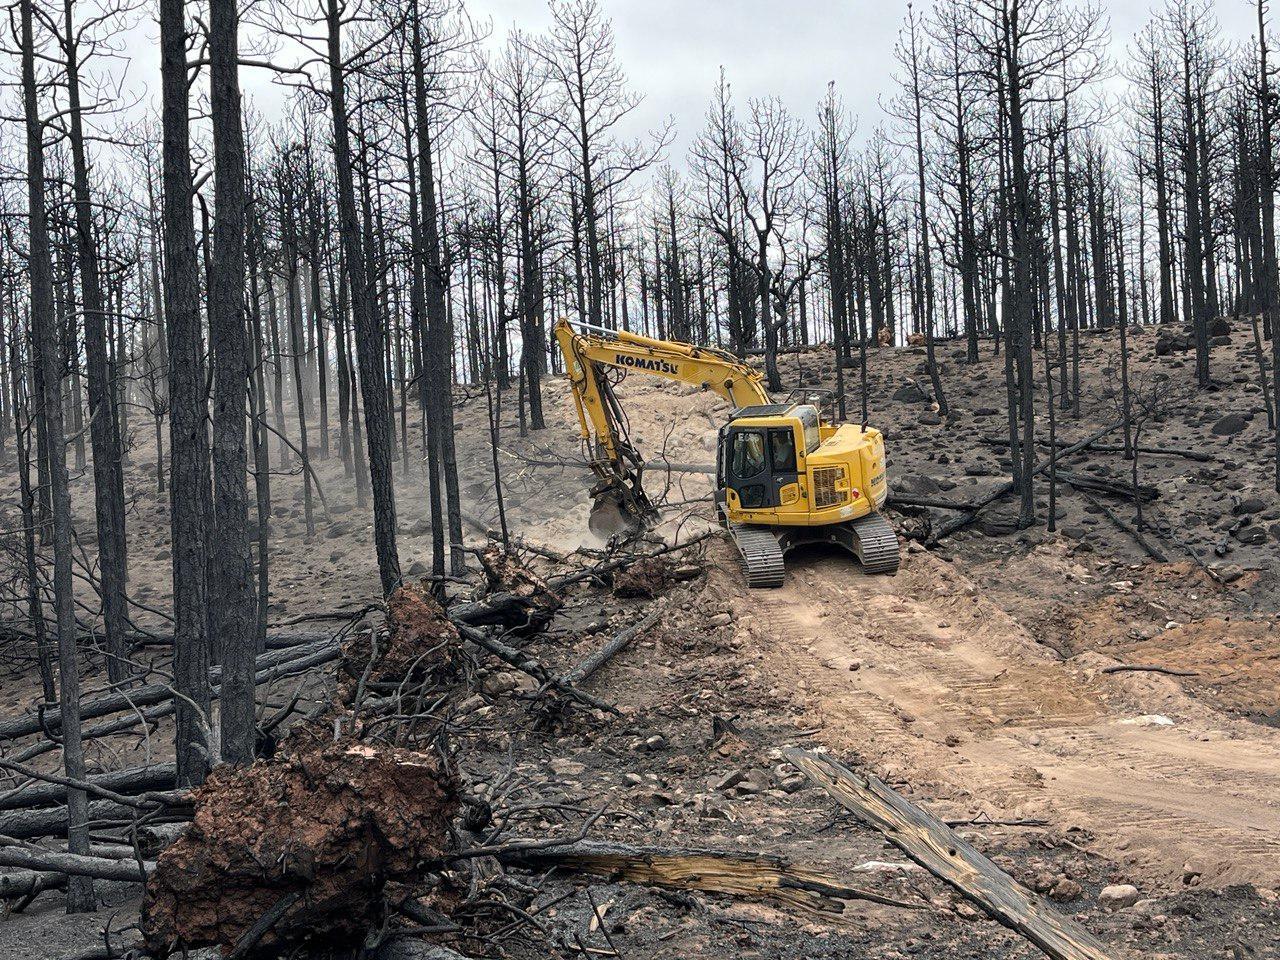 Piece of Yellow, heavy equipment called an excavator working to drag burned trees over dozer line.  Slope has many standing, burned trees across the landscape.